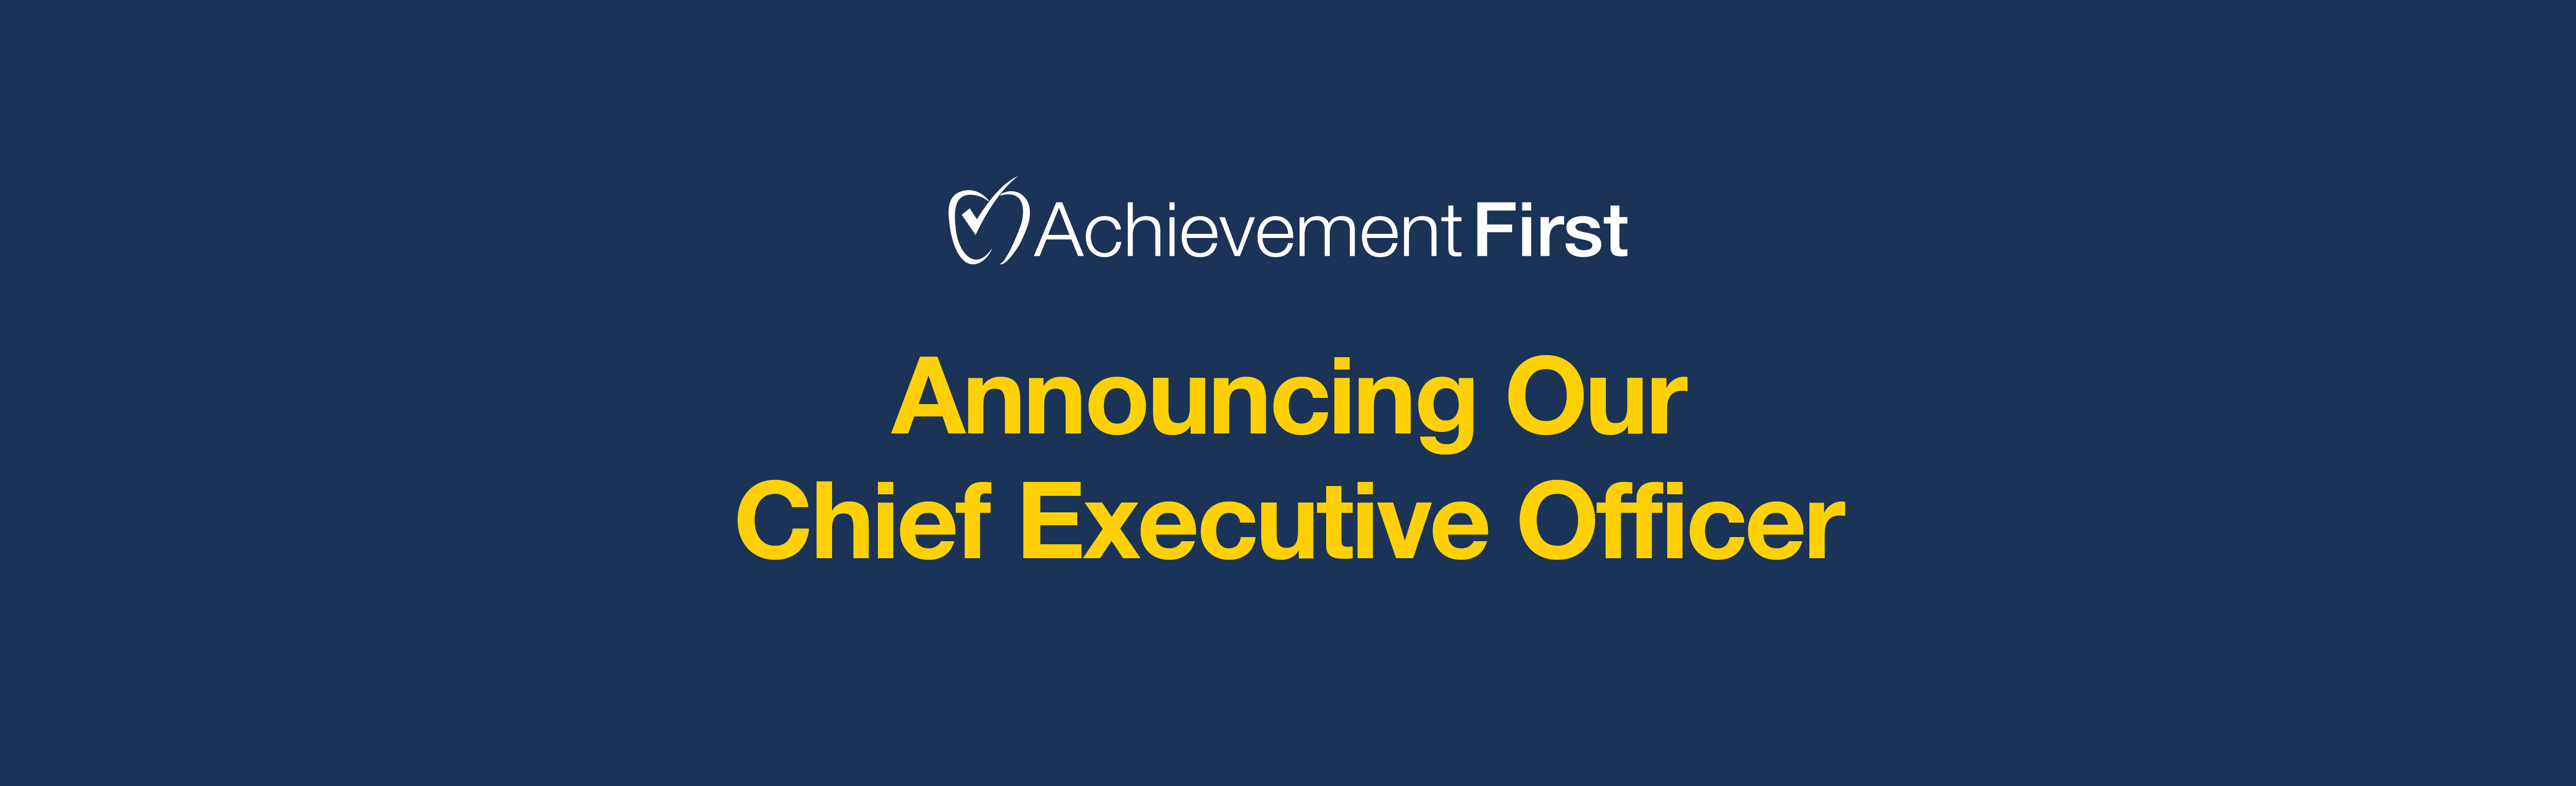 Announcing Achievement First’s Chief Executive Officer